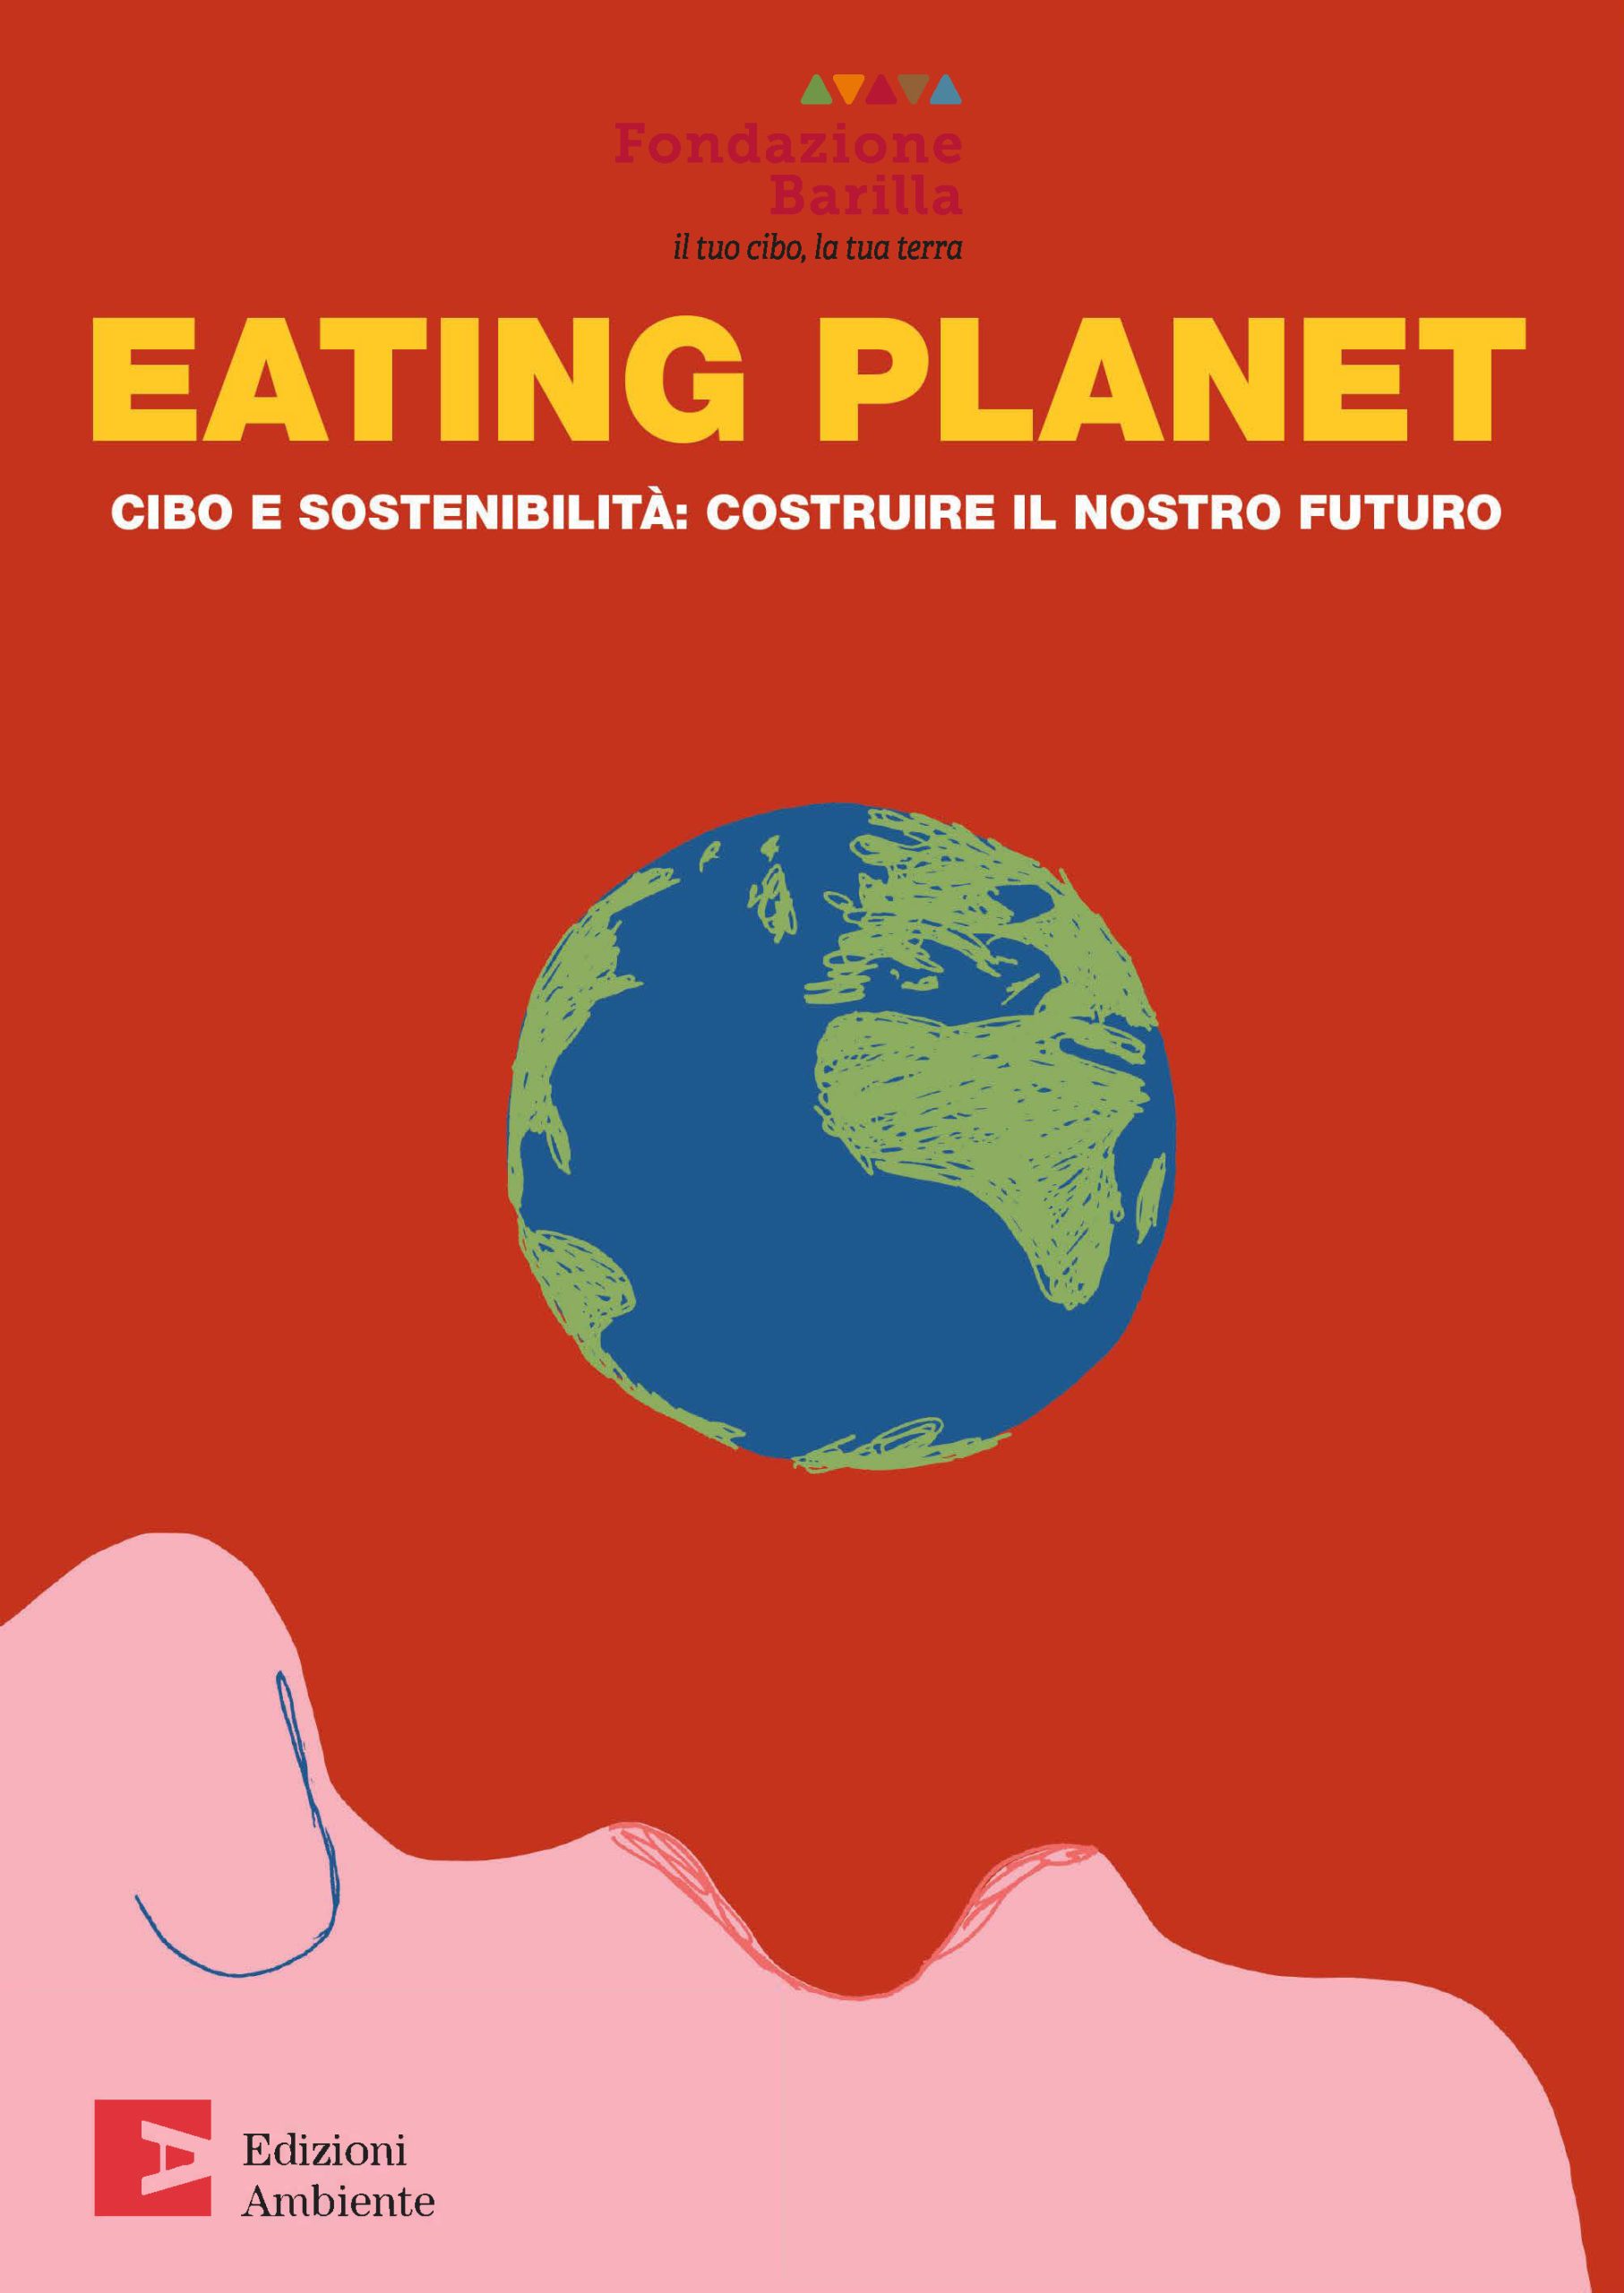 Eating planet